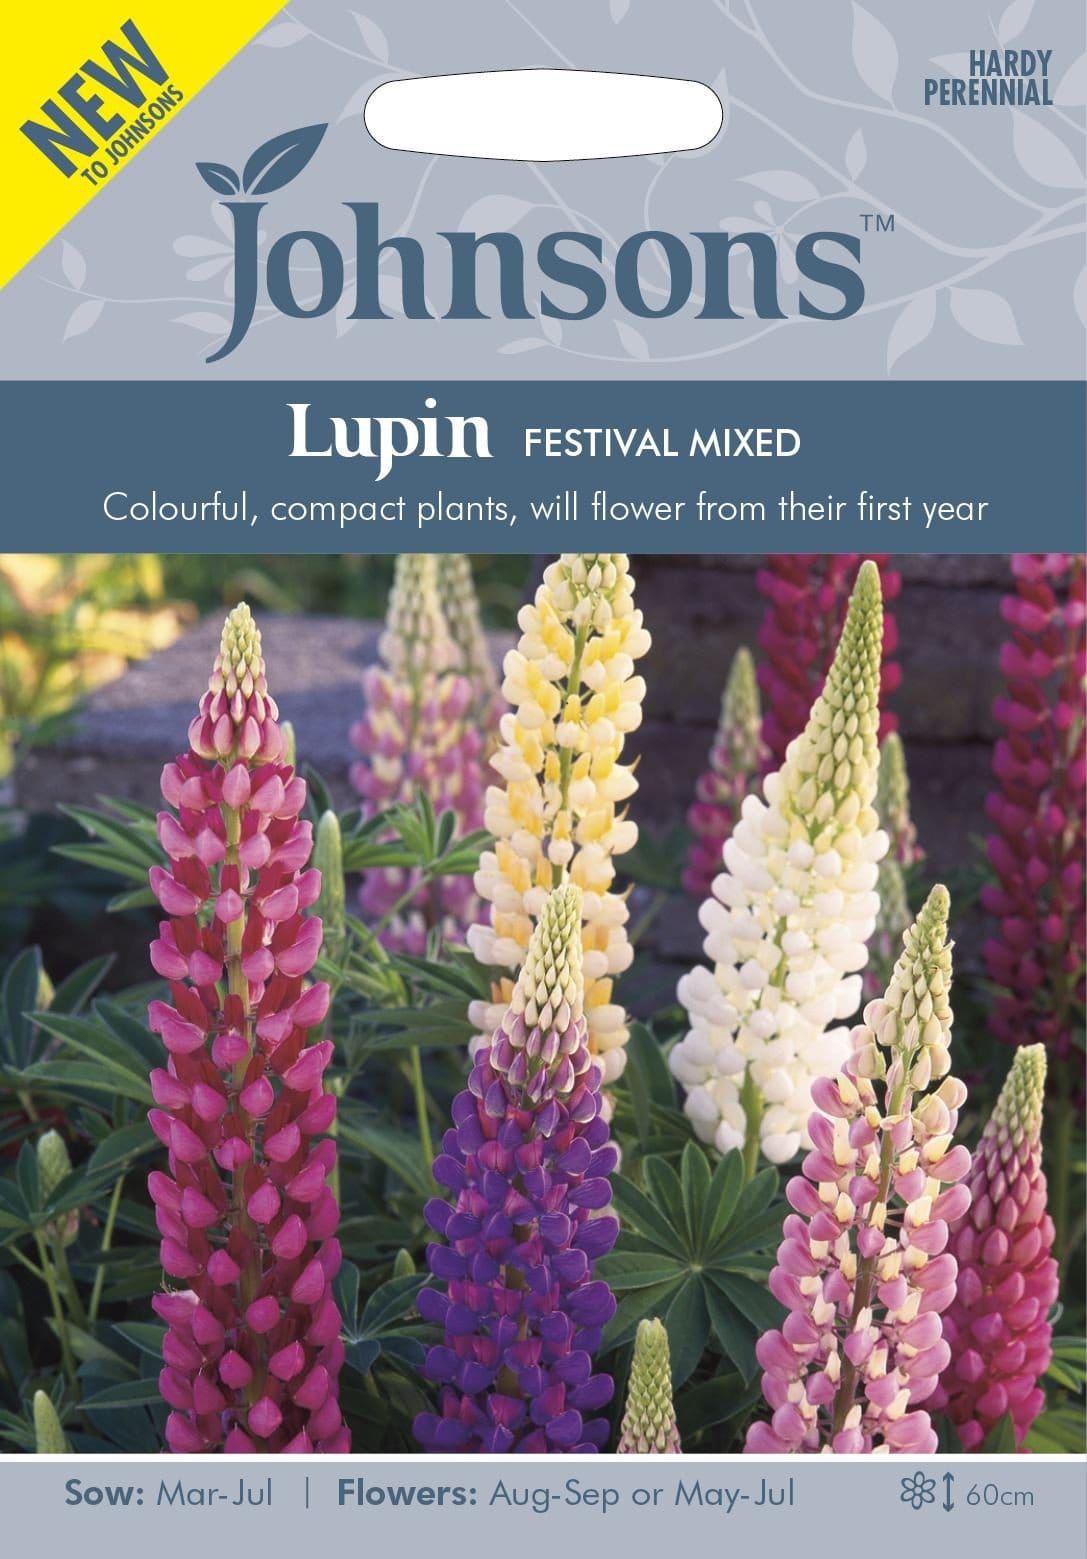 Johnsons Lupin Festival Mixed 30 Seeds